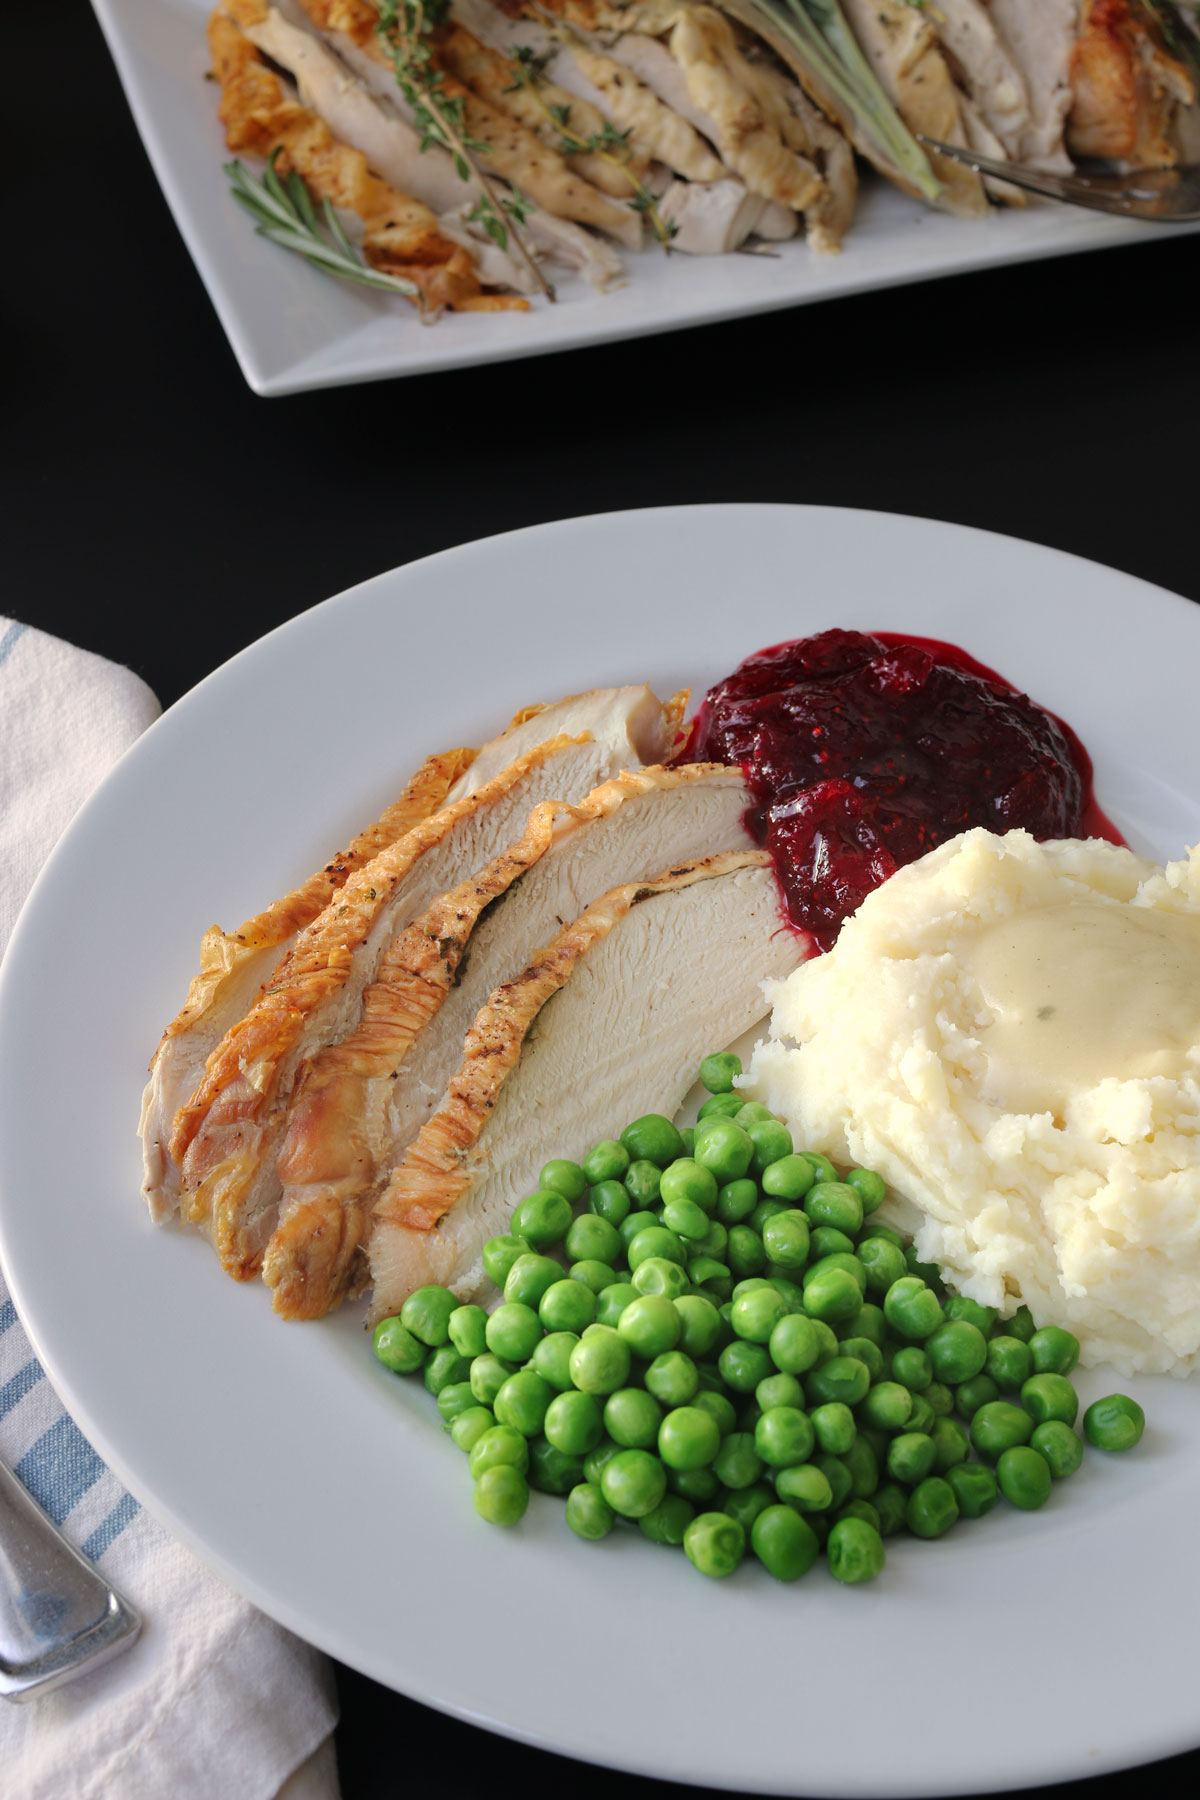 dinner plate with slices of roast turkey breast, peas, mashed potatoes, gravy, and cranberry sauce.